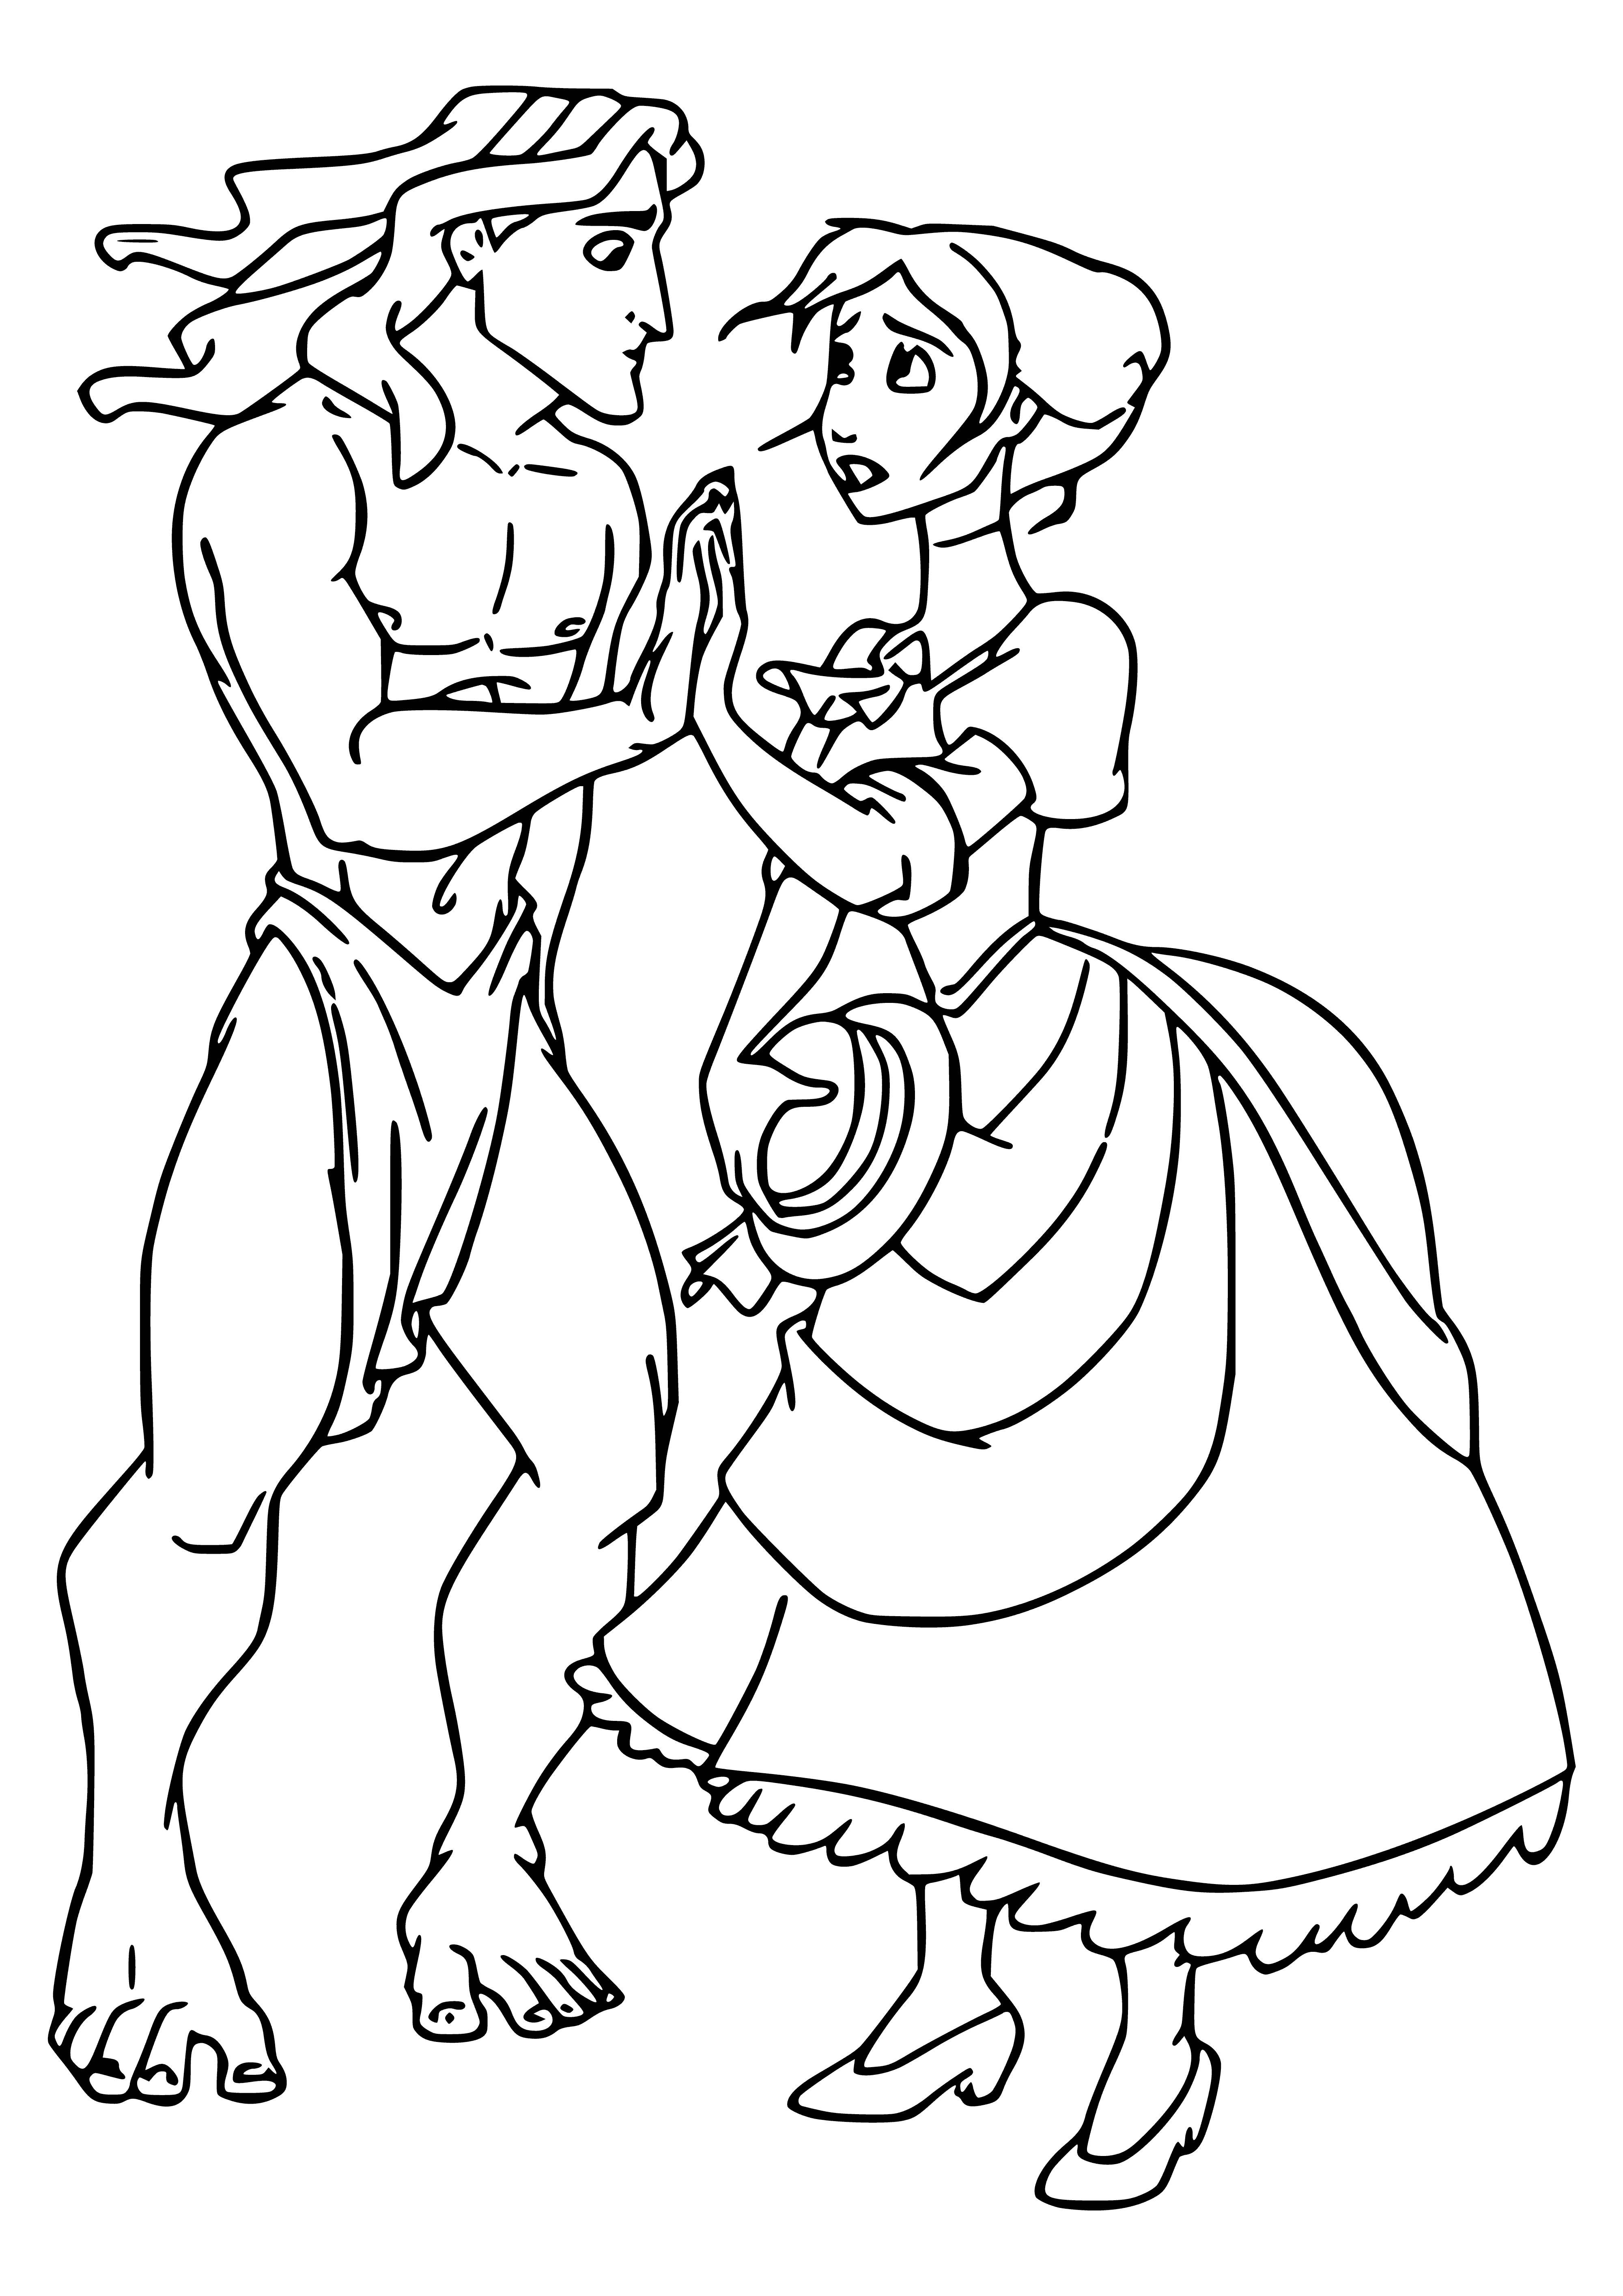 coloring page: A big, strong man covered in brown fur and wearing a loincloth swings through the trees with a leather whip, accompanied by a beautiful woman with blonde hair and blue eyes wearing a white dress.